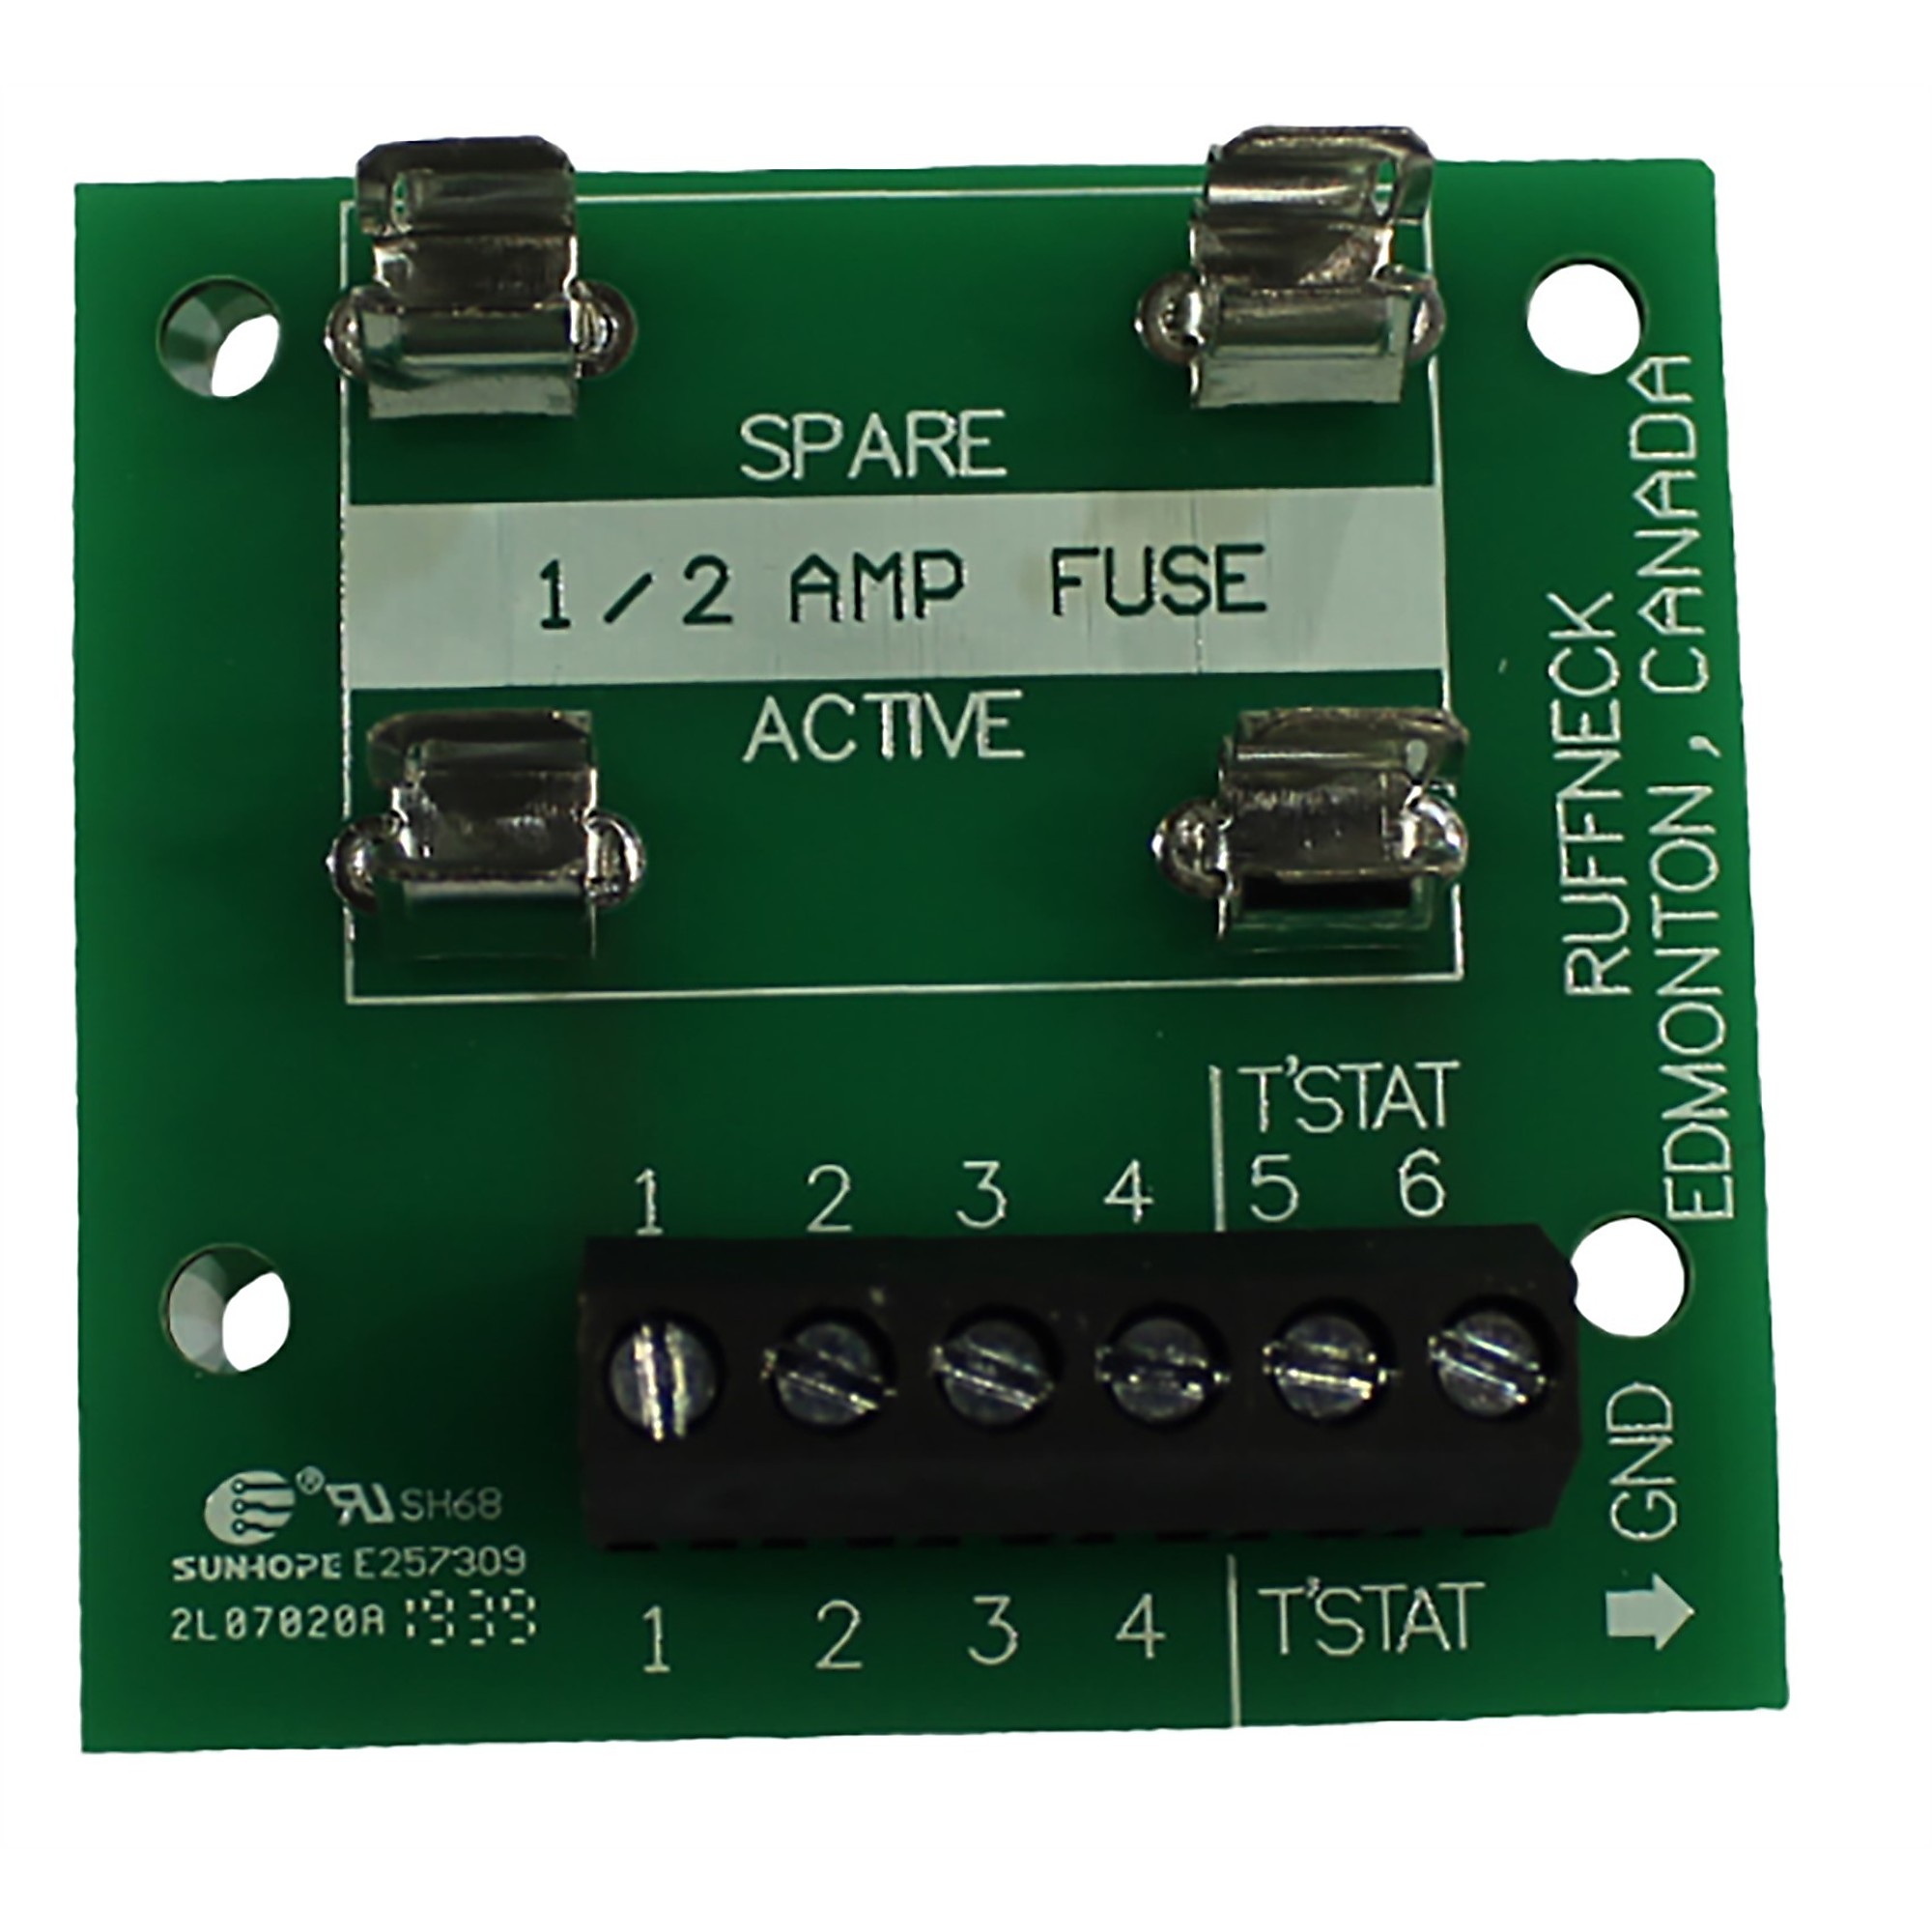 Replacement PCB board for Ruffneck Explosion-Proof FX Series Forced Air Heaters, Model 3514